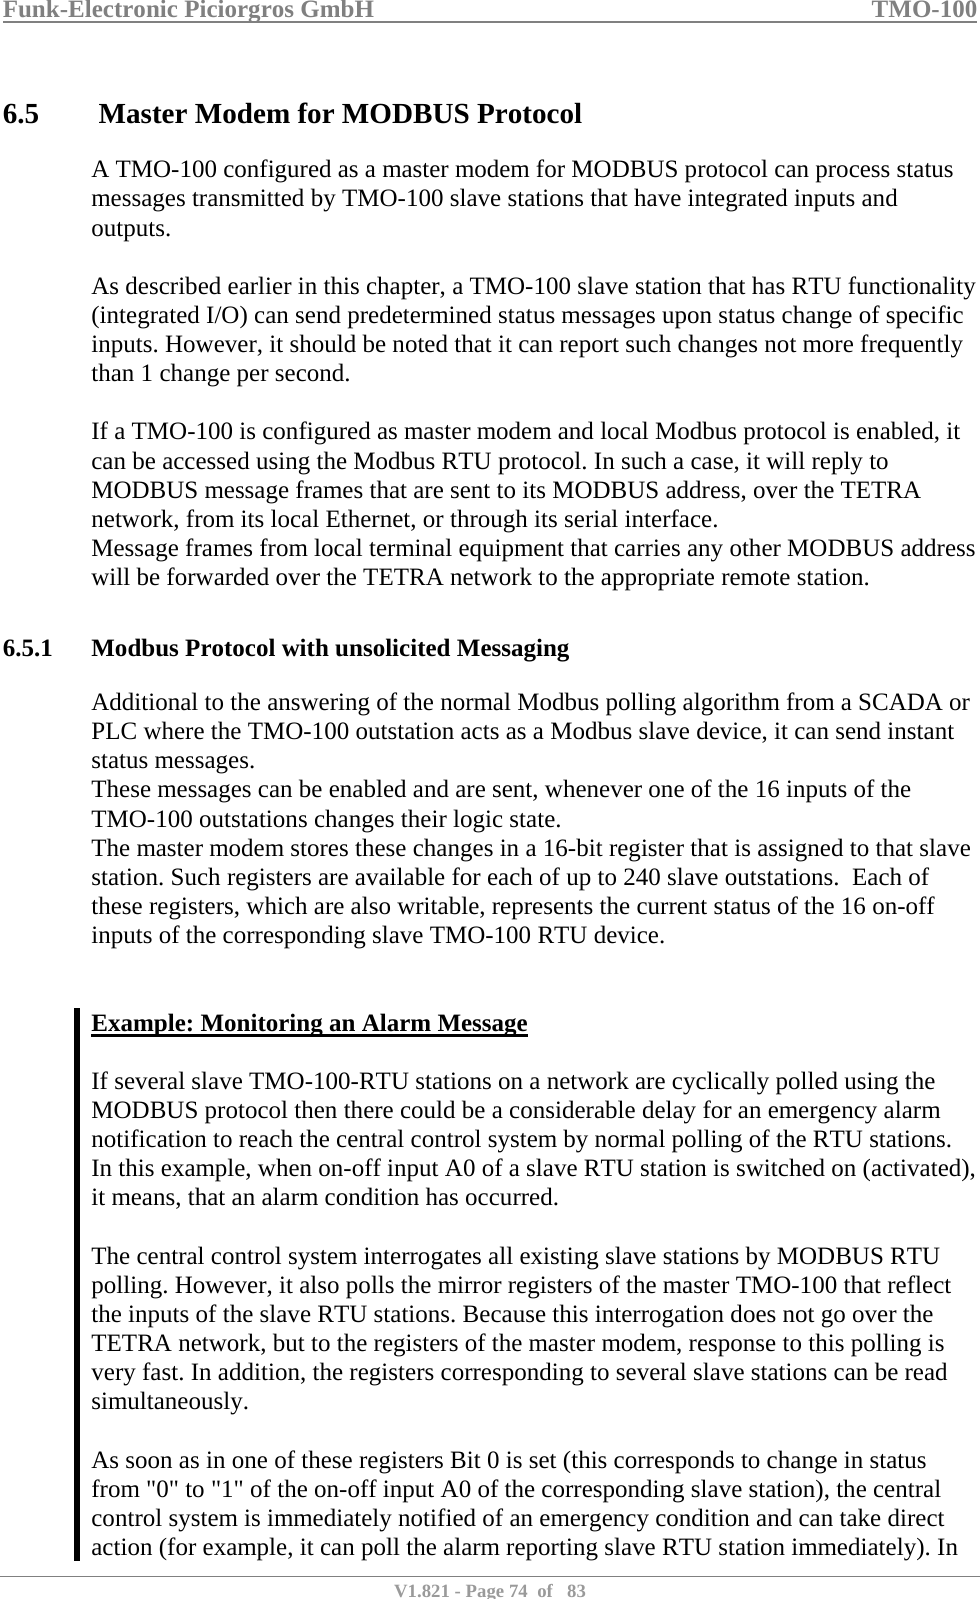 Funk-Electronic Piciorgros GmbH   TMO-100   V1.821 - Page 74  of   83   6.5  Master Modem for MODBUS Protocol A TMO-100 configured as a master modem for MODBUS protocol can process status messages transmitted by TMO-100 slave stations that have integrated inputs and outputs.  As described earlier in this chapter, a TMO-100 slave station that has RTU functionality (integrated I/O) can send predetermined status messages upon status change of specific inputs. However, it should be noted that it can report such changes not more frequently than 1 change per second.   If a TMO-100 is configured as master modem and local Modbus protocol is enabled, it can be accessed using the Modbus RTU protocol. In such a case, it will reply to MODBUS message frames that are sent to its MODBUS address, over the TETRA network, from its local Ethernet, or through its serial interface.  Message frames from local terminal equipment that carries any other MODBUS address will be forwarded over the TETRA network to the appropriate remote station.   6.5.1 Modbus Protocol with unsolicited Messaging Additional to the answering of the normal Modbus polling algorithm from a SCADA or PLC where the TMO-100 outstation acts as a Modbus slave device, it can send instant status messages. These messages can be enabled and are sent, whenever one of the 16 inputs of the TMO-100 outstations changes their logic state. The master modem stores these changes in a 16-bit register that is assigned to that slave station. Such registers are available for each of up to 240 slave outstations.  Each of these registers, which are also writable, represents the current status of the 16 on-off inputs of the corresponding slave TMO-100 RTU device.   Example: Monitoring an Alarm Message  If several slave TMO-100-RTU stations on a network are cyclically polled using the MODBUS protocol then there could be a considerable delay for an emergency alarm notification to reach the central control system by normal polling of the RTU stations.  In this example, when on-off input A0 of a slave RTU station is switched on (activated), it means, that an alarm condition has occurred.   The central control system interrogates all existing slave stations by MODBUS RTU polling. However, it also polls the mirror registers of the master TMO-100 that reflect the inputs of the slave RTU stations. Because this interrogation does not go over the TETRA network, but to the registers of the master modem, response to this polling is very fast. In addition, the registers corresponding to several slave stations can be read simultaneously.   As soon as in one of these registers Bit 0 is set (this corresponds to change in status from &quot;0&quot; to &quot;1&quot; of the on-off input A0 of the corresponding slave station), the central control system is immediately notified of an emergency condition and can take direct action (for example, it can poll the alarm reporting slave RTU station immediately). In 